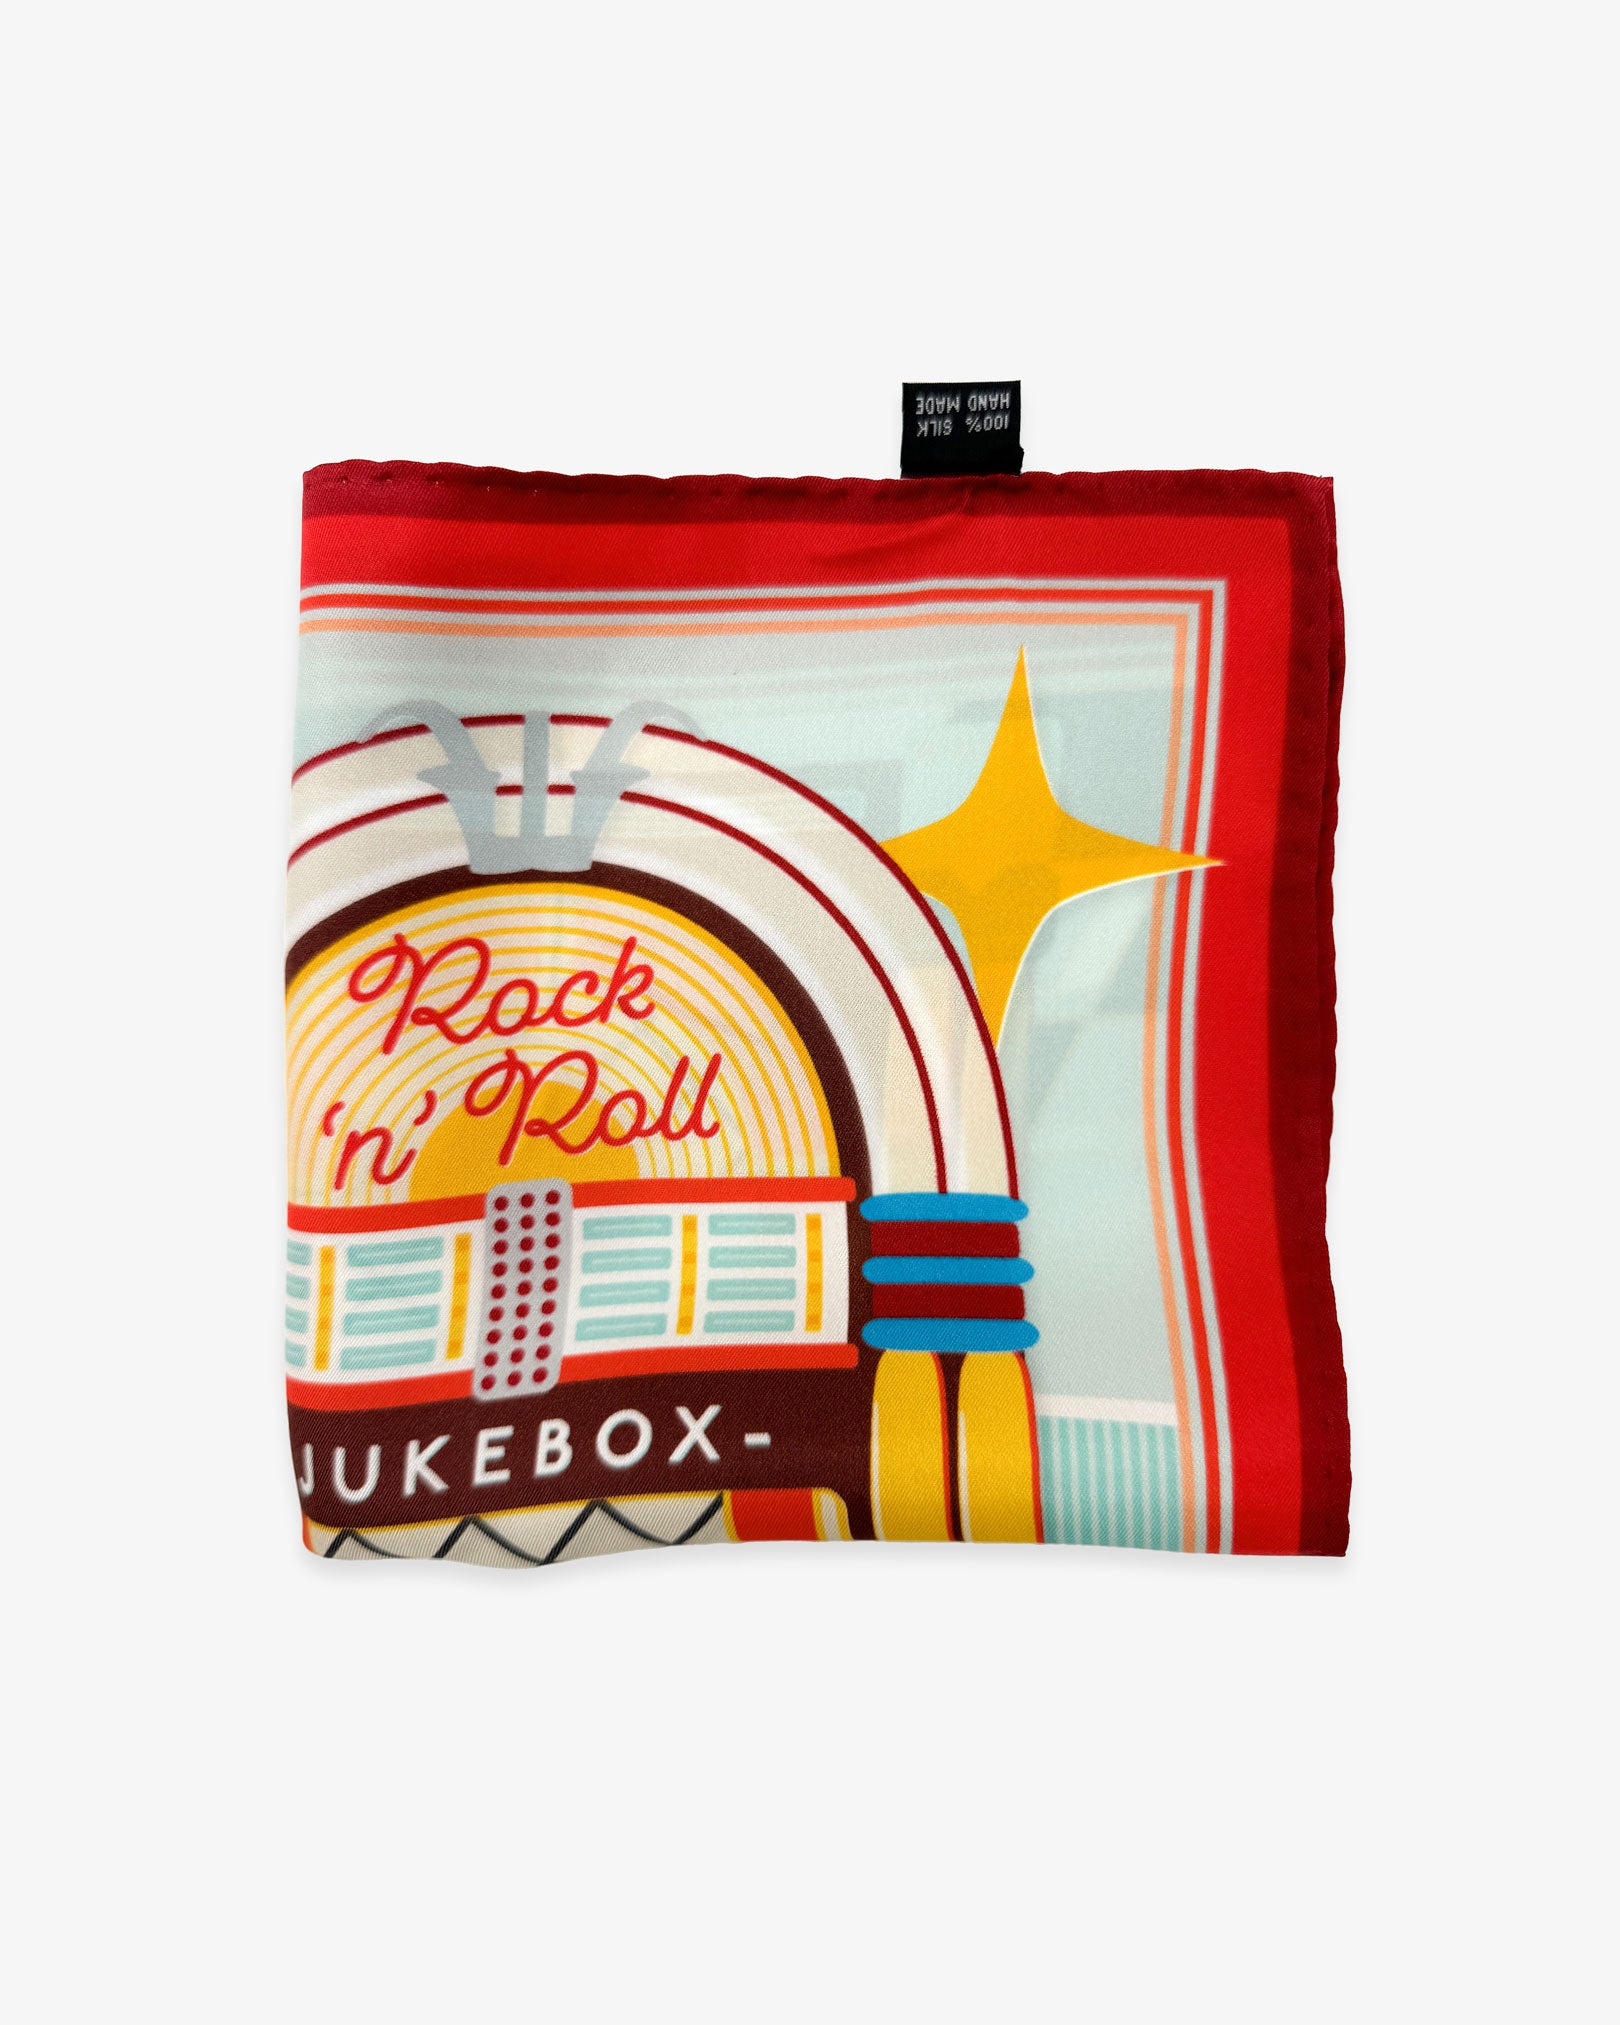 The 'Jukebox 2' silk pocket square from SOHO Scarves folded into a quarter, showing a portion of the iconic 1950's jukebox illustration and red border.